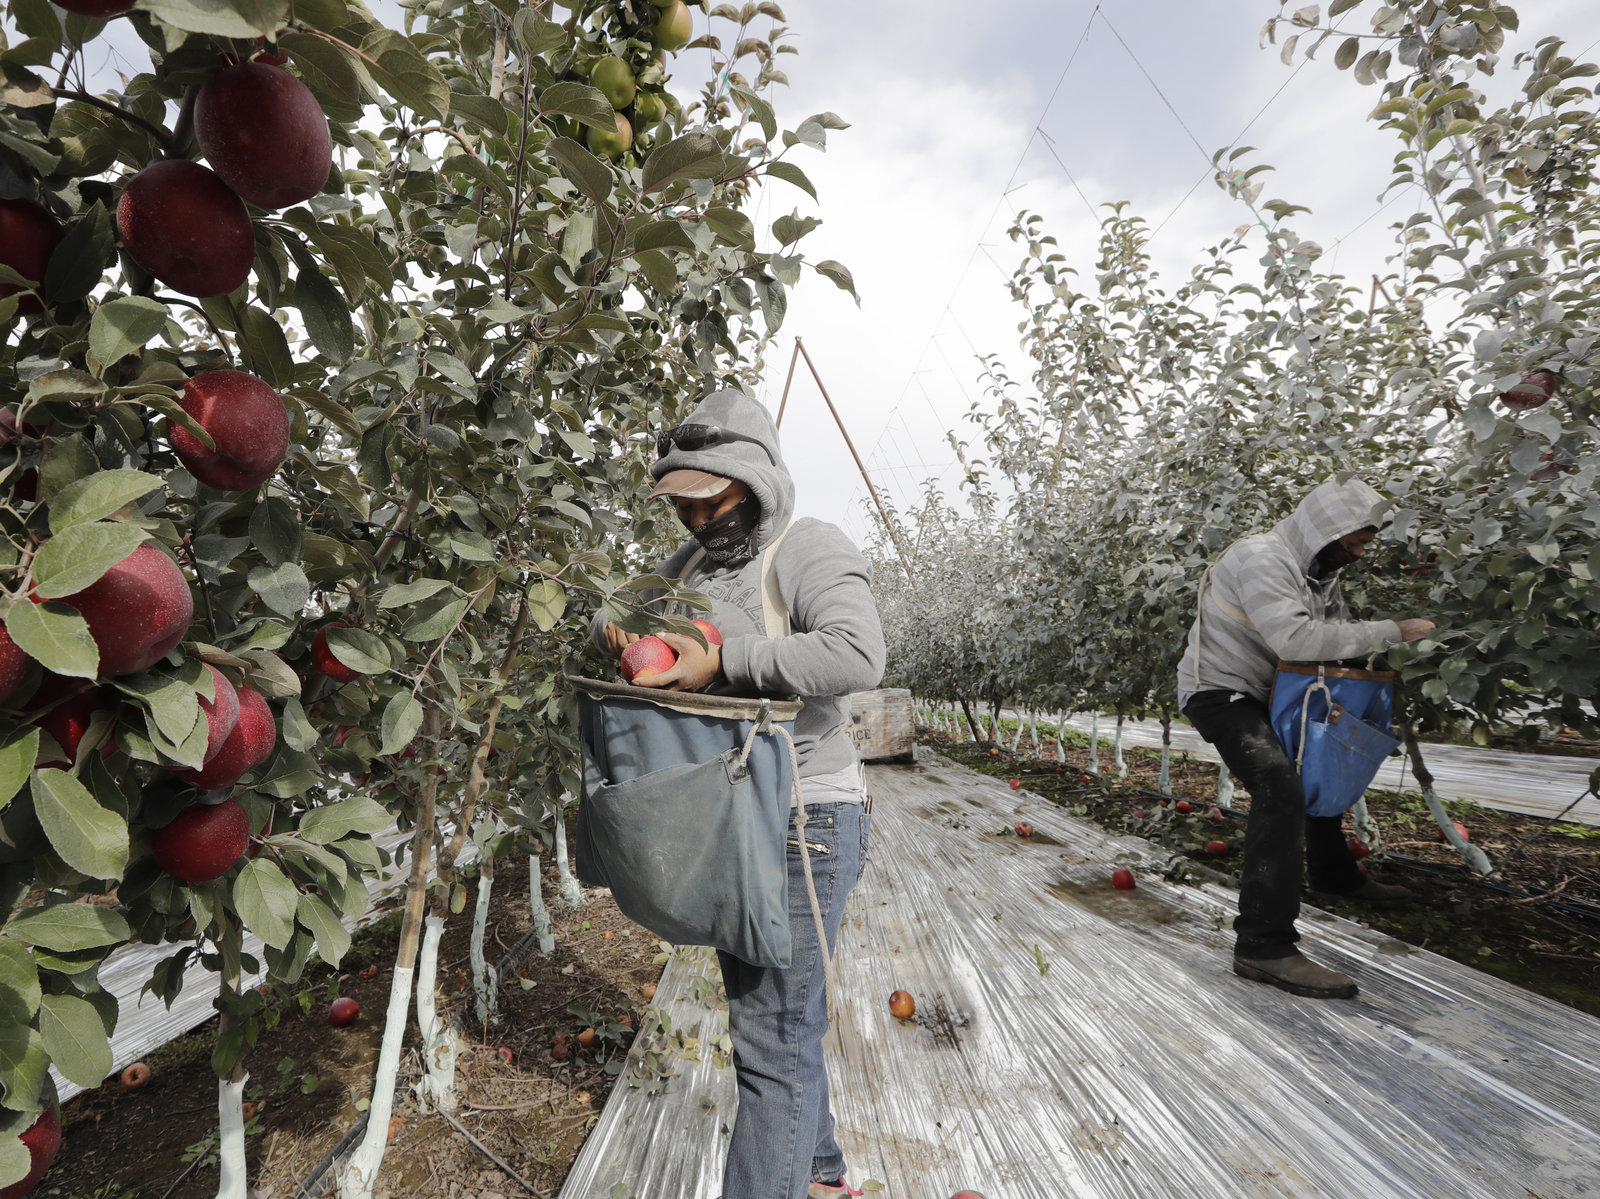 Workers pick apples in a Wapato, Washington, orchard in October 2019. U.S. farms employ hundreds of thousands of seasonal workers, mostly from Mexico, who enter the country on H-2A visas. The potential impact of the coronavirus on seasonal workers has the food industry on edge. Photo: Elaine Thompson / AP